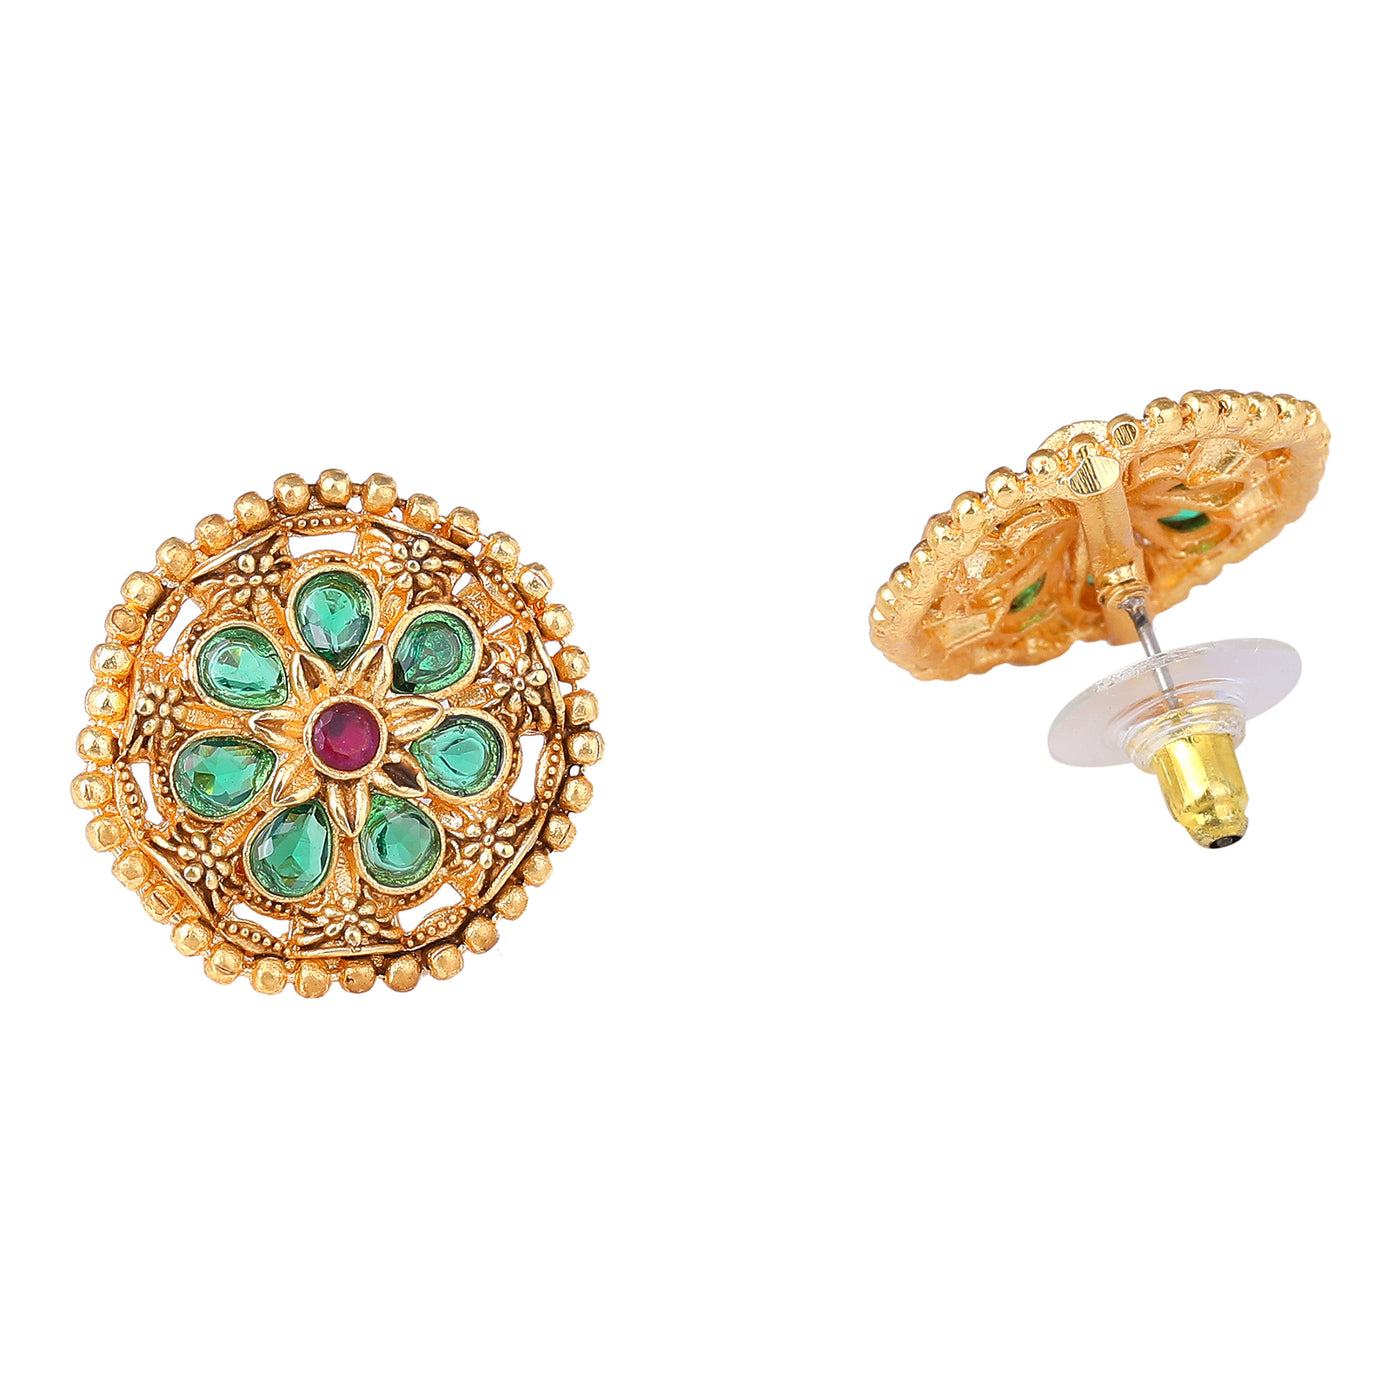 Estele Gold Plated Floral Designer Matt Finish Stud Earrings with Multi-color Crystals for Women